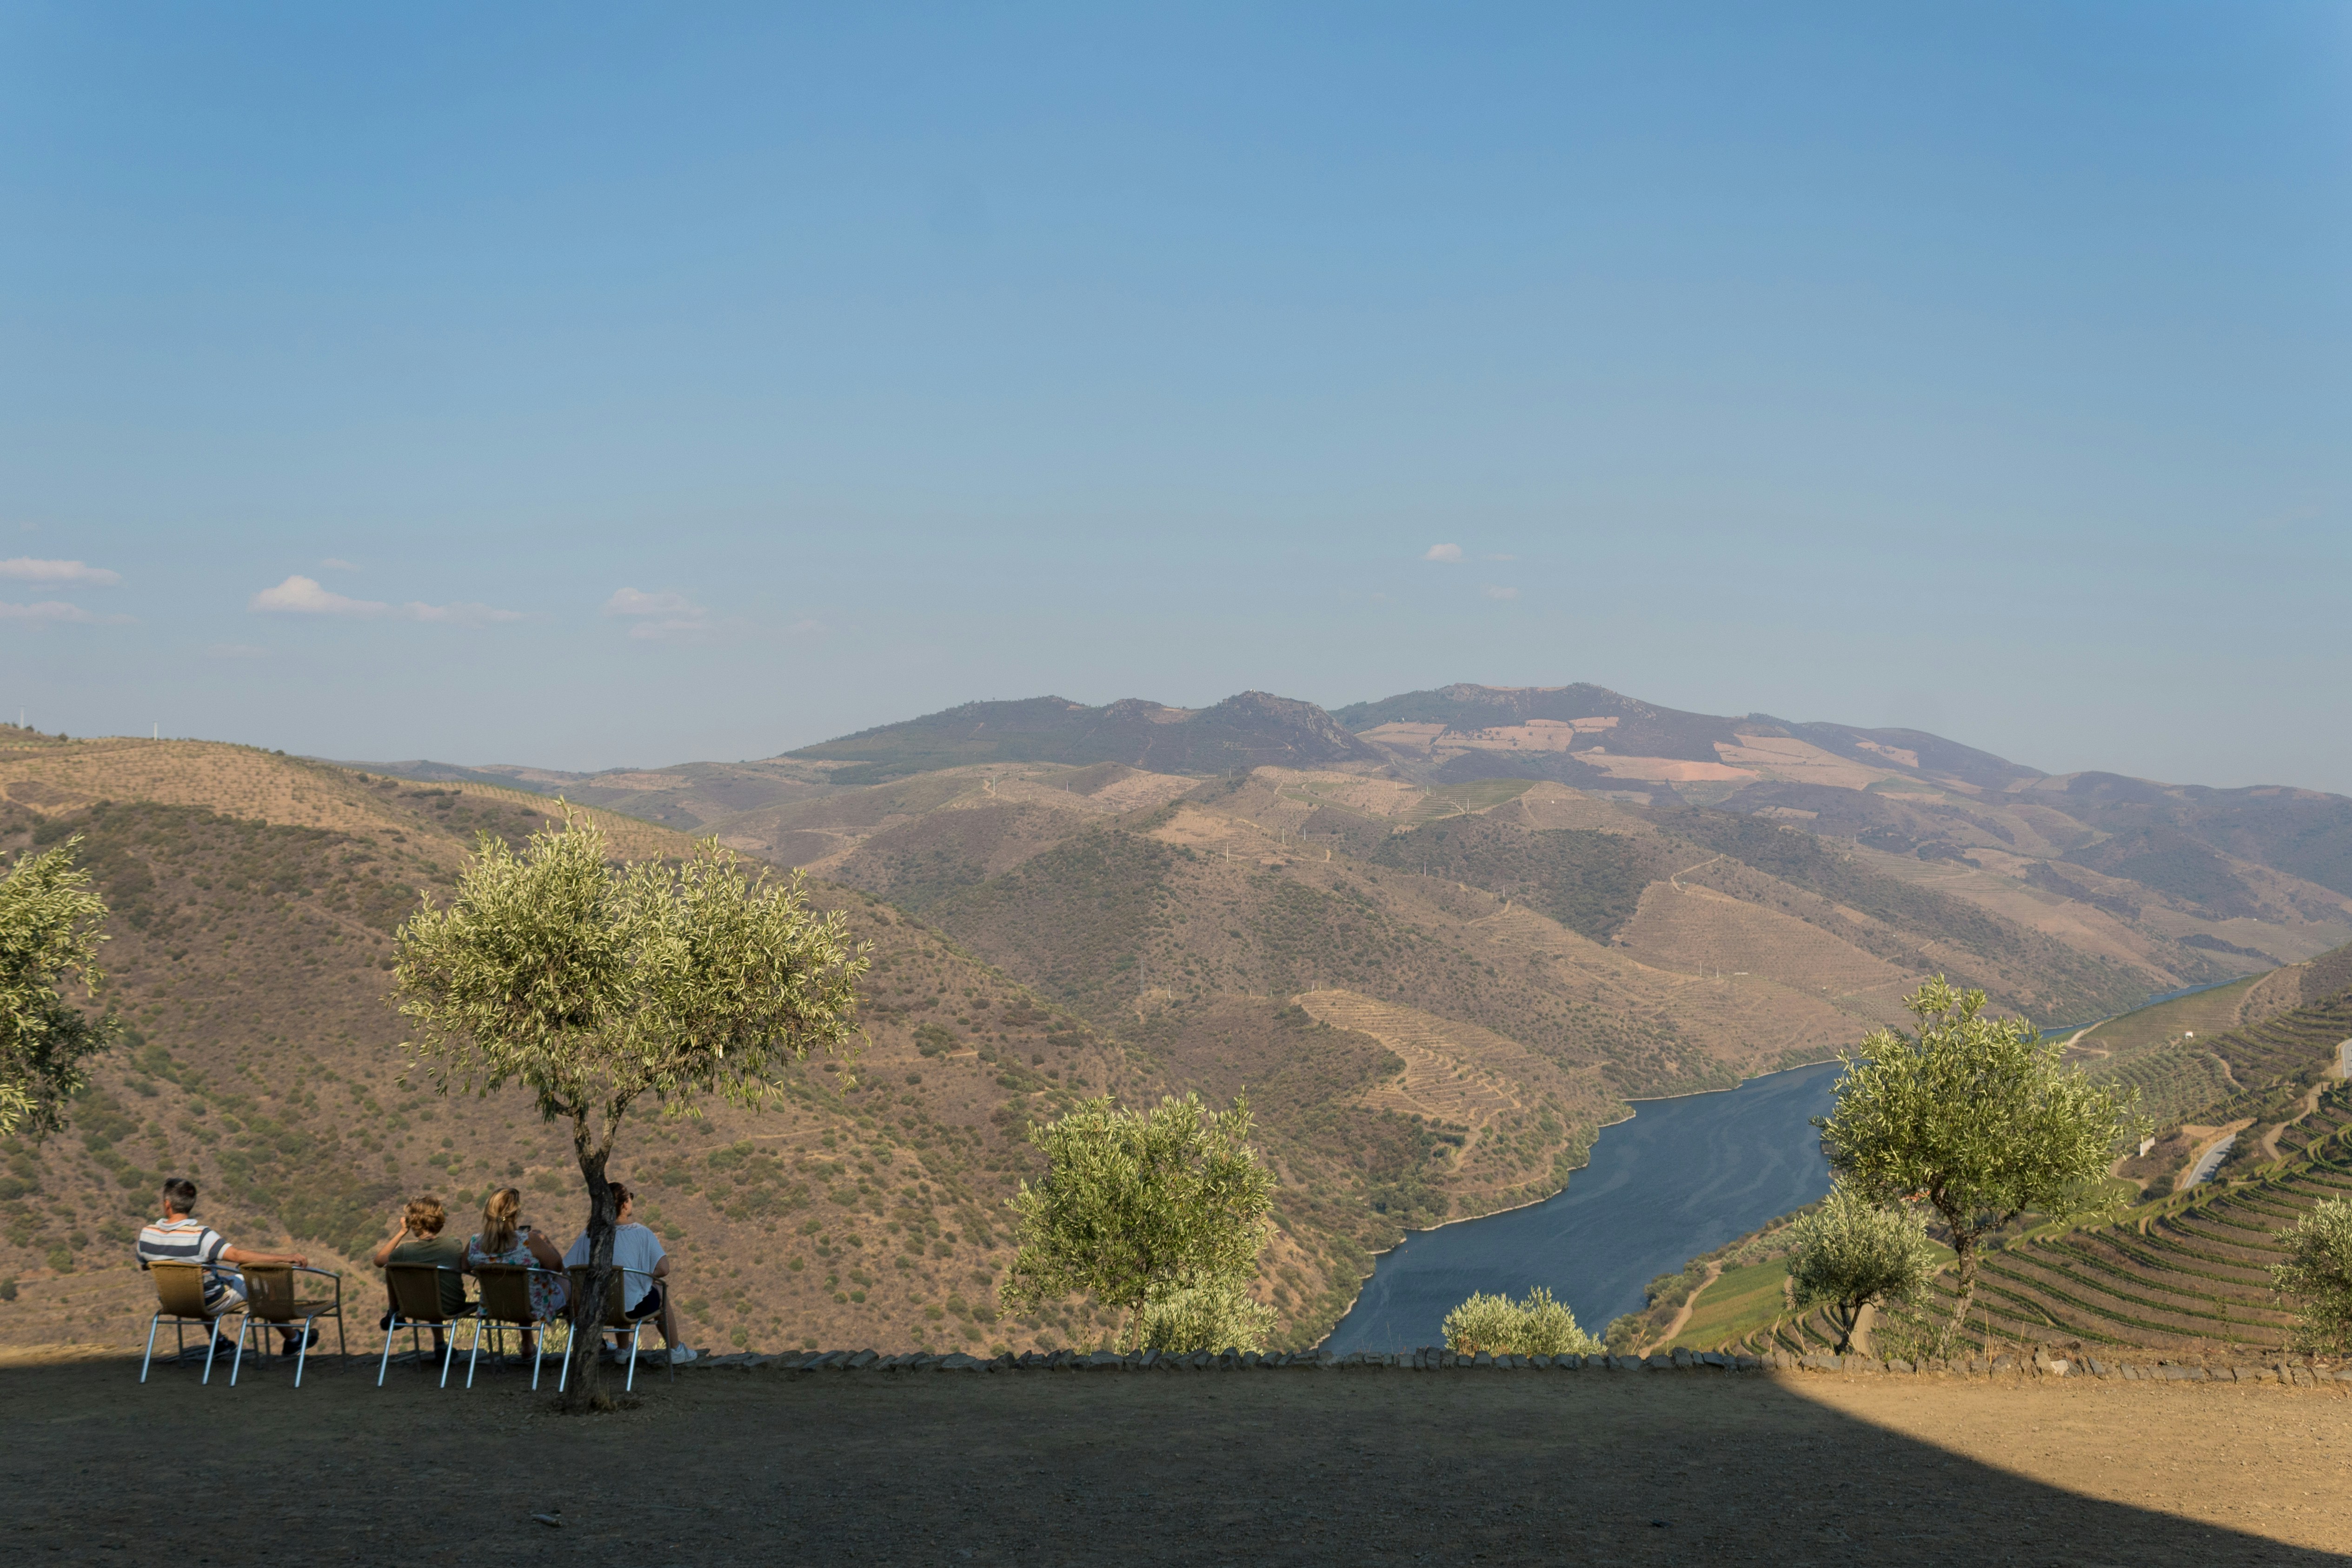 Looking at the Douro river and valley, from the Côa Museum.